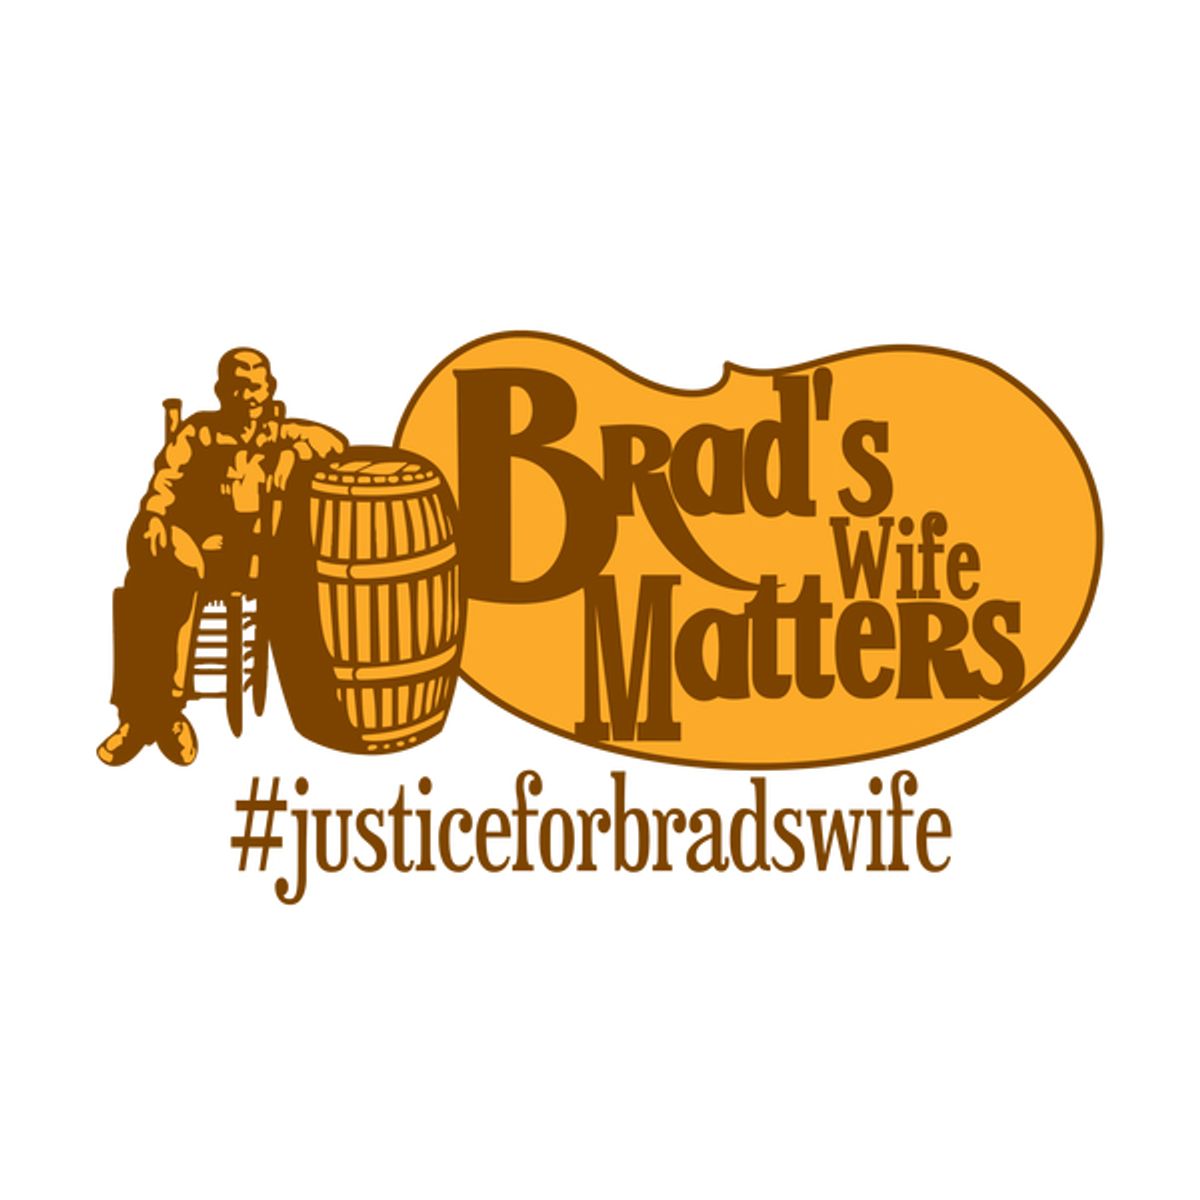 The Post That Went Viral: Justice For Brad's Wife